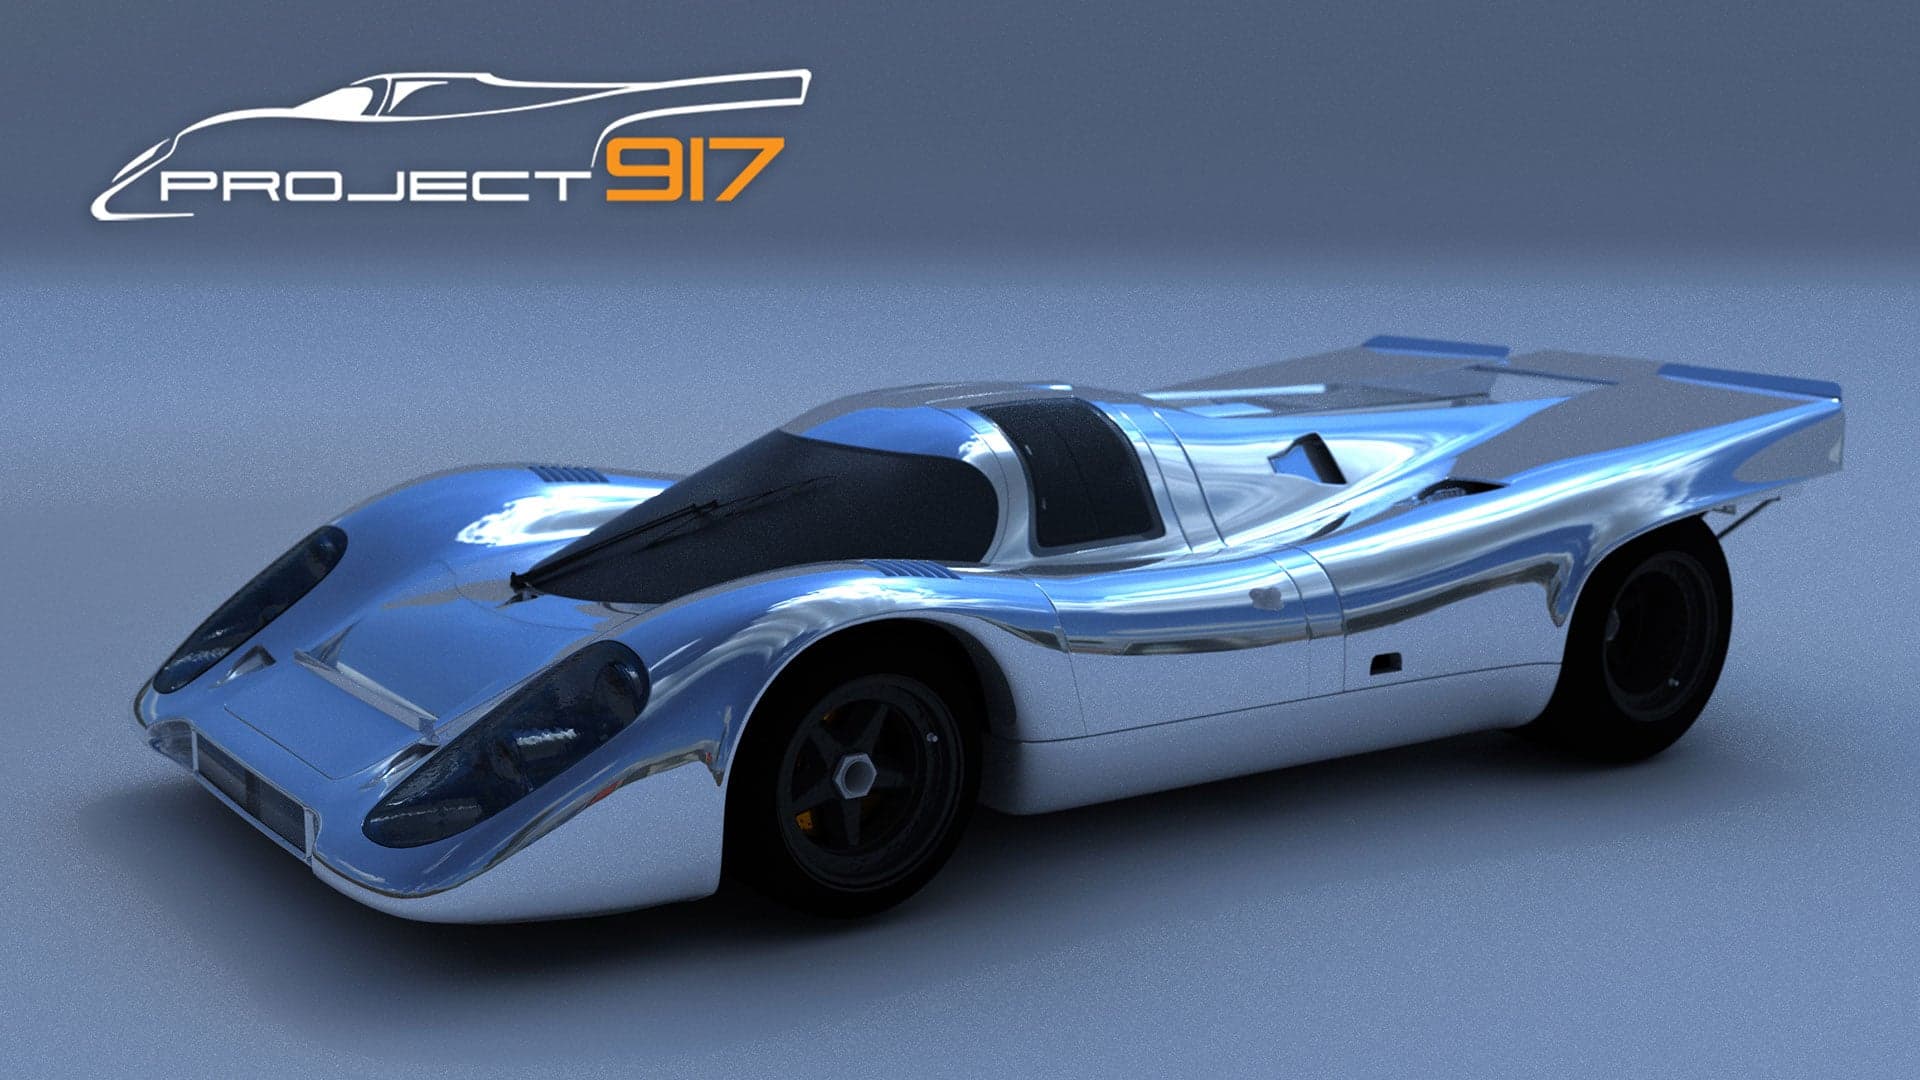 We Talked to Project 917, the Team Revamping the Porsche 917